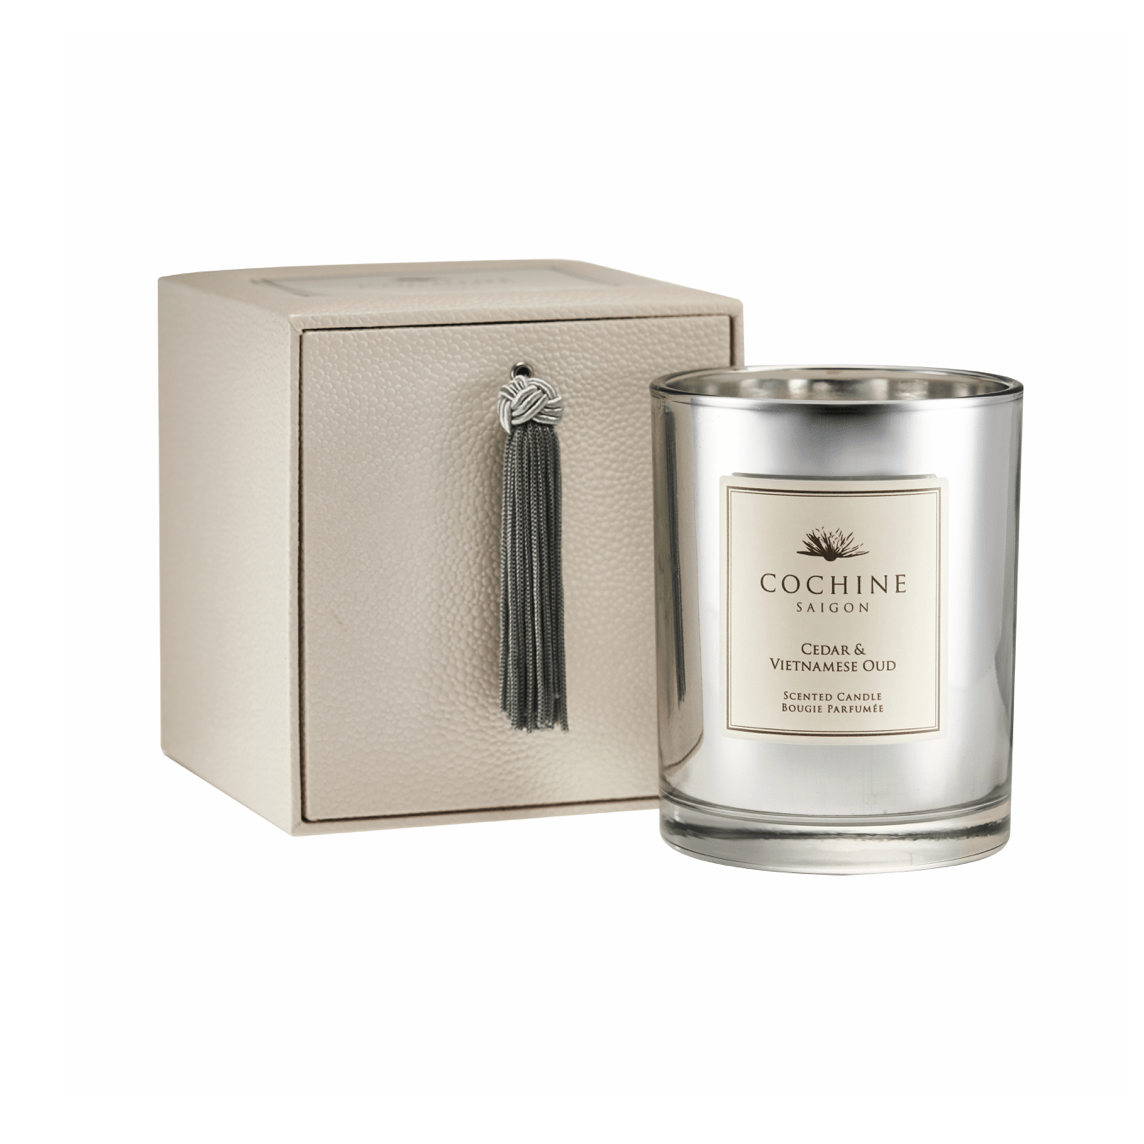 Cochine Home Fragrances of Cochines luxury scented candles and Cochine reed diffuers in Cochine Cedar & Vietnamese Oud Candle